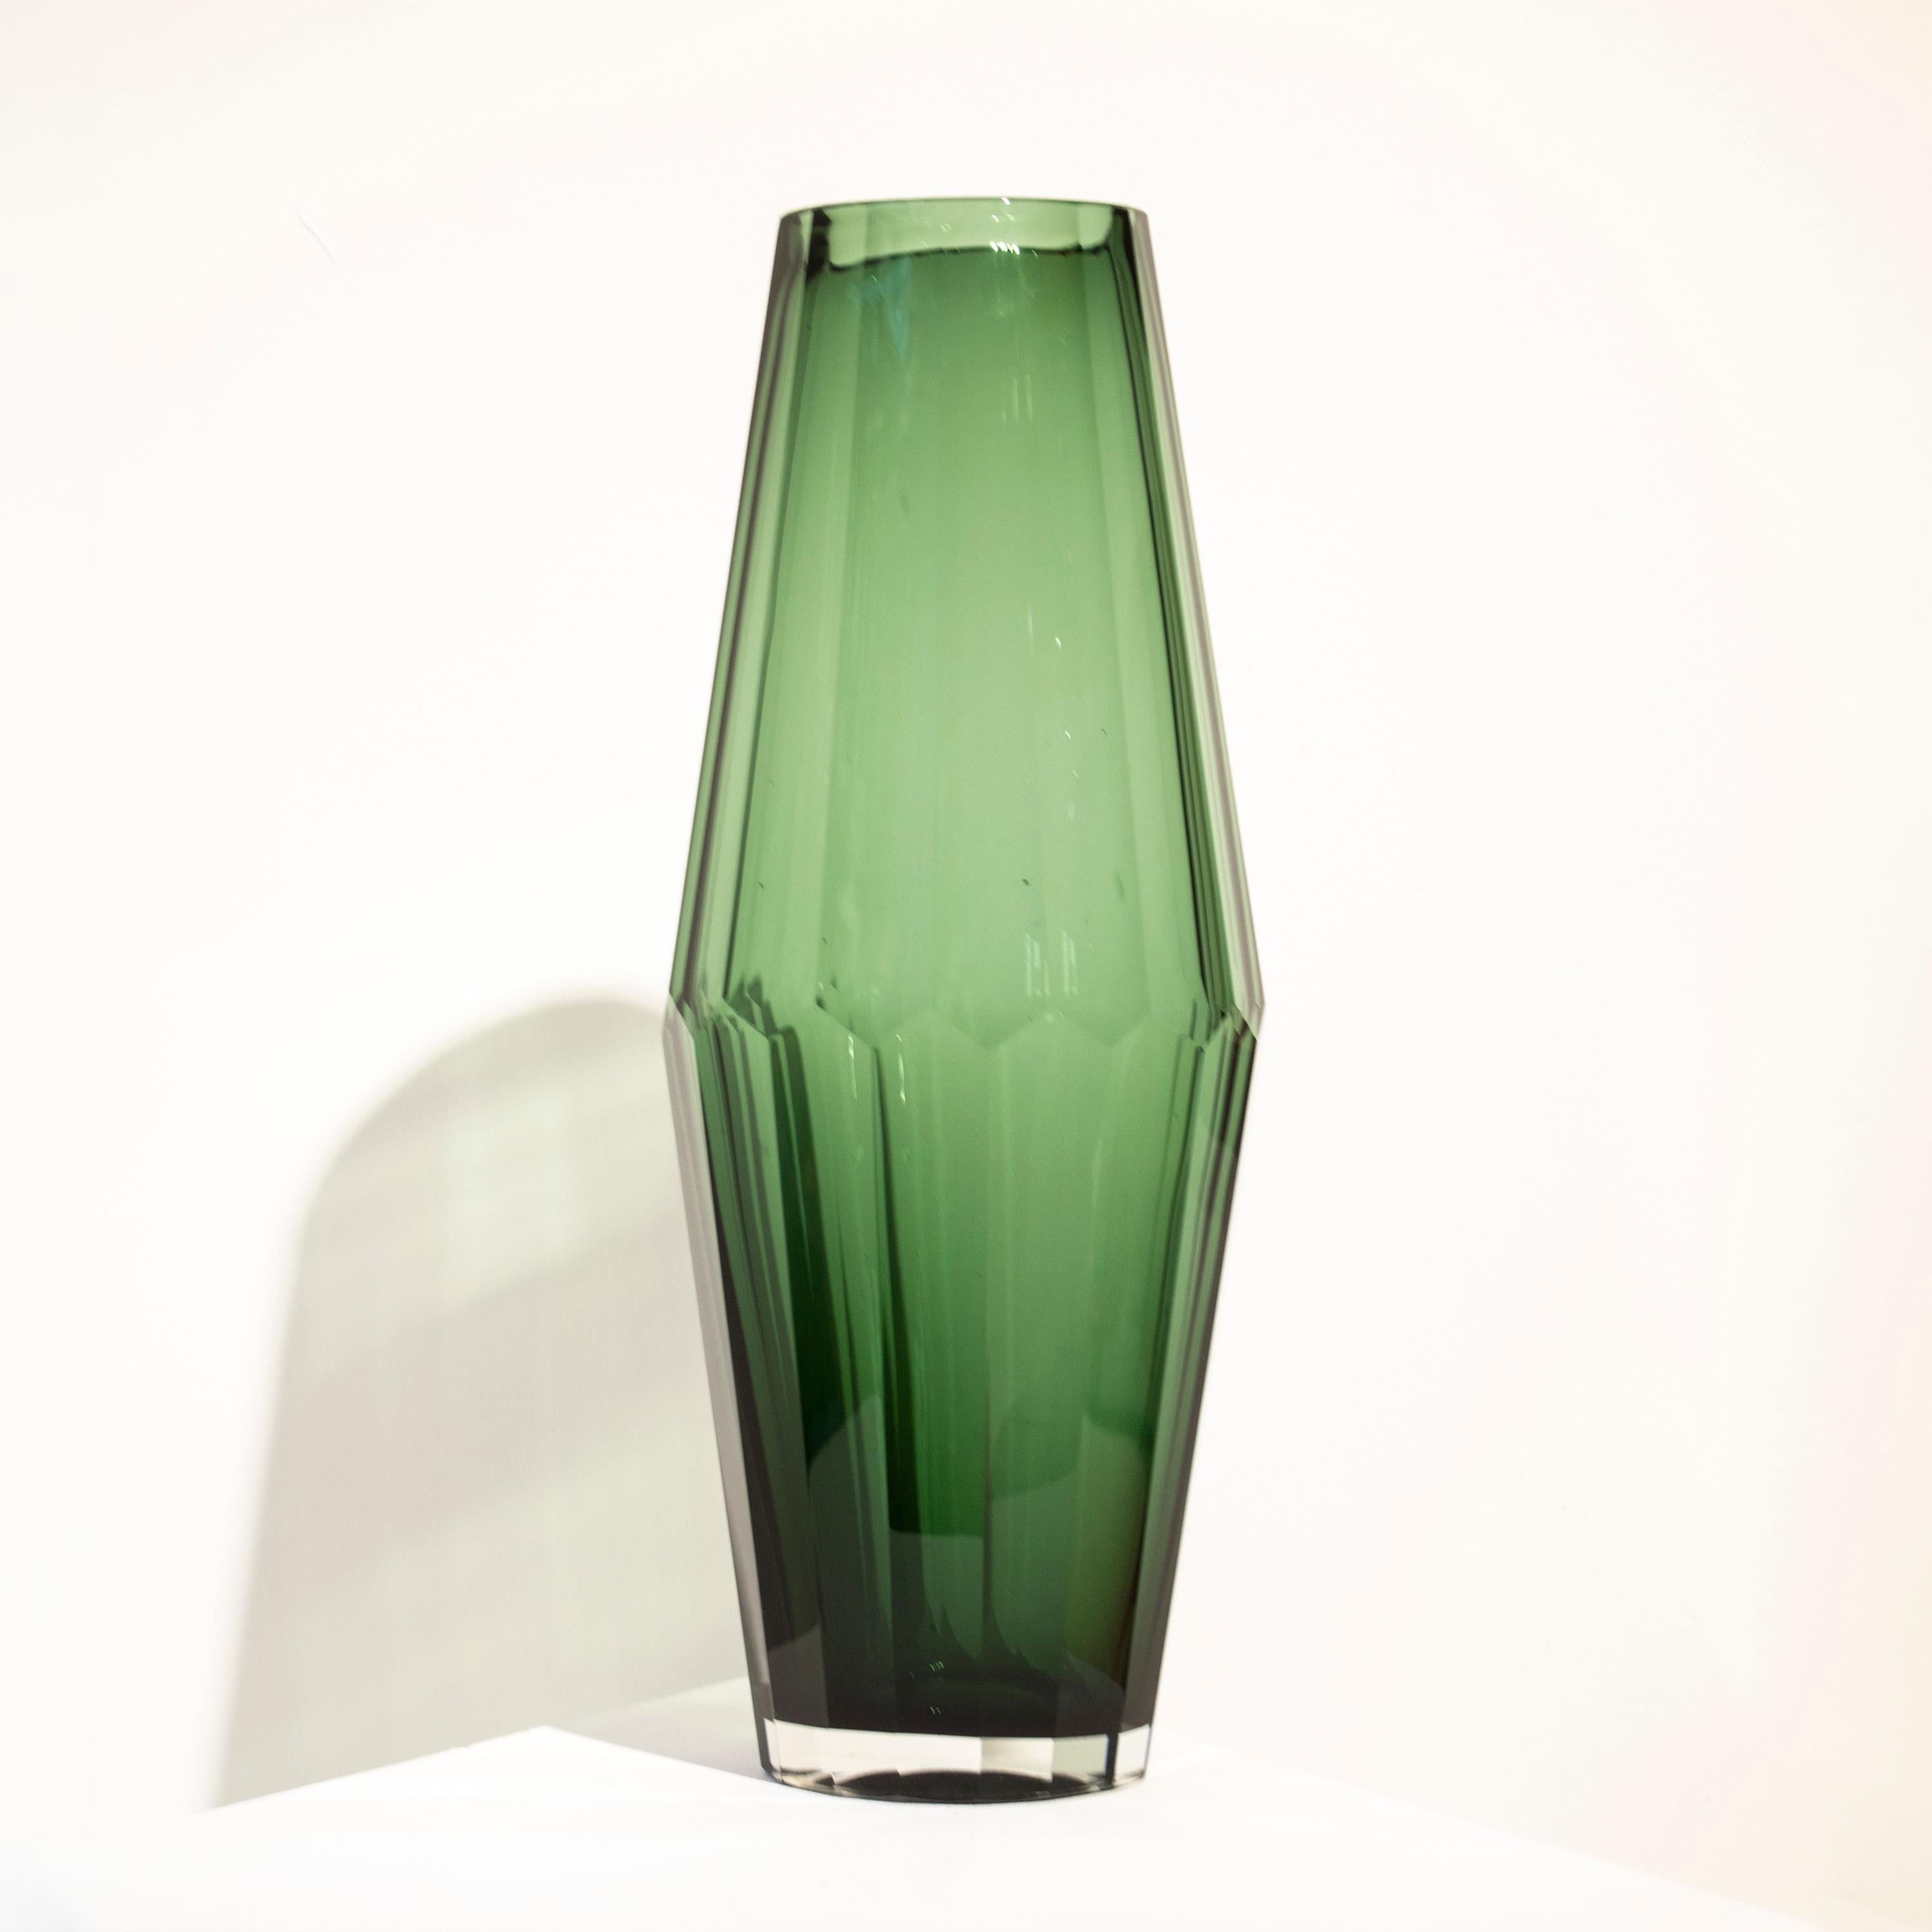 Hand-blown Italian green semi-transparent glass vase, with a faceted shape.